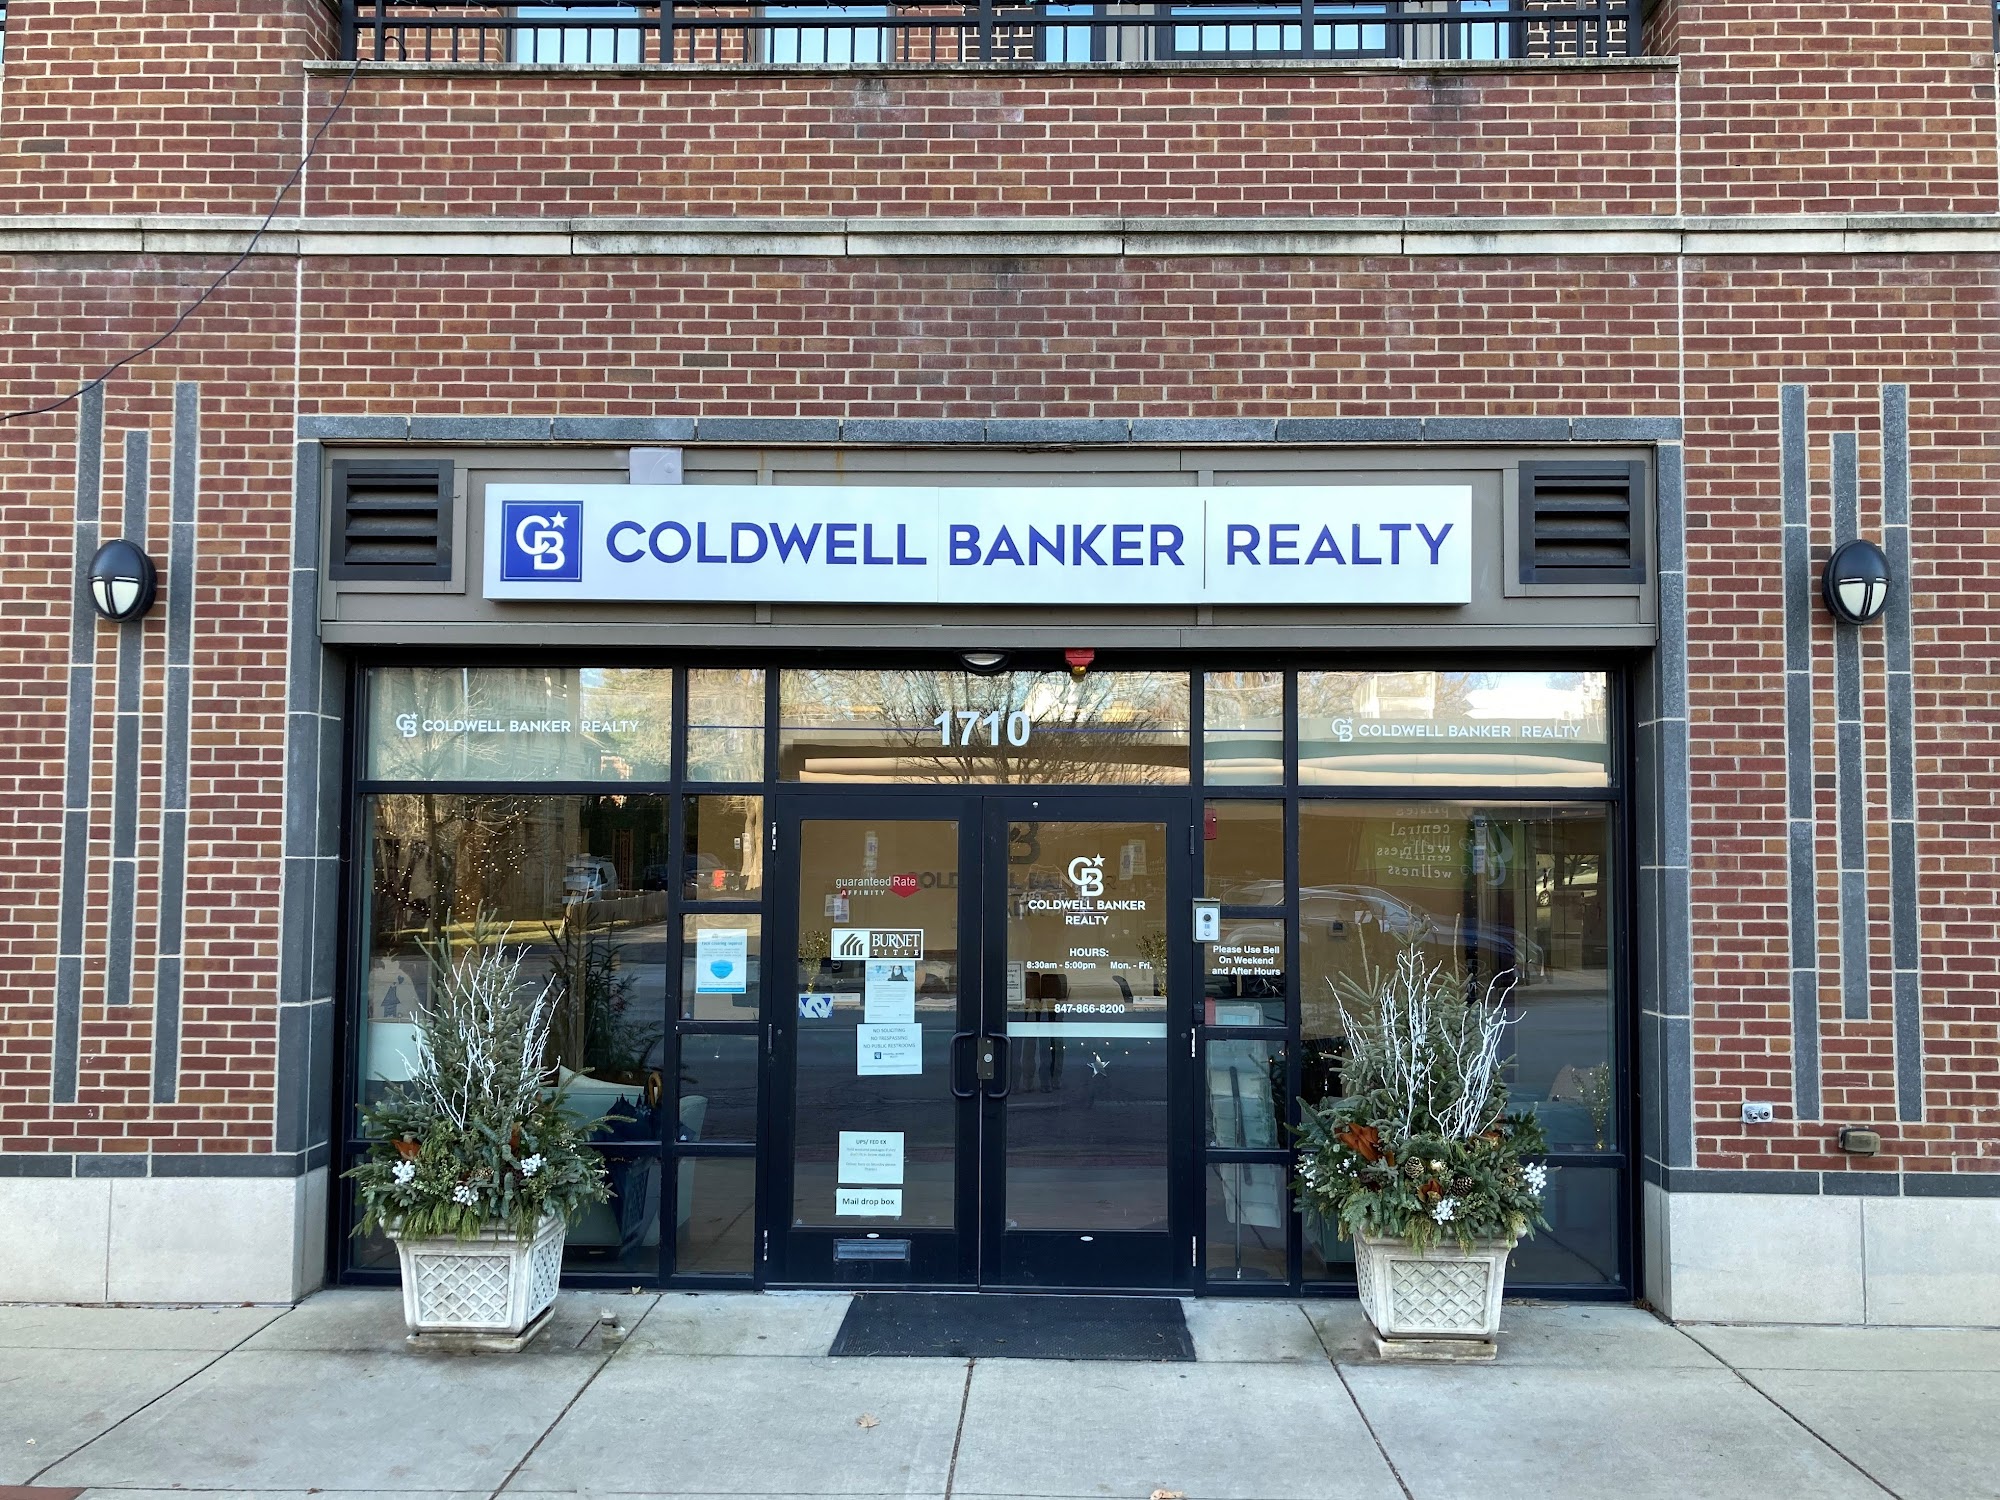 Coldwell Banker Realty - Evanston